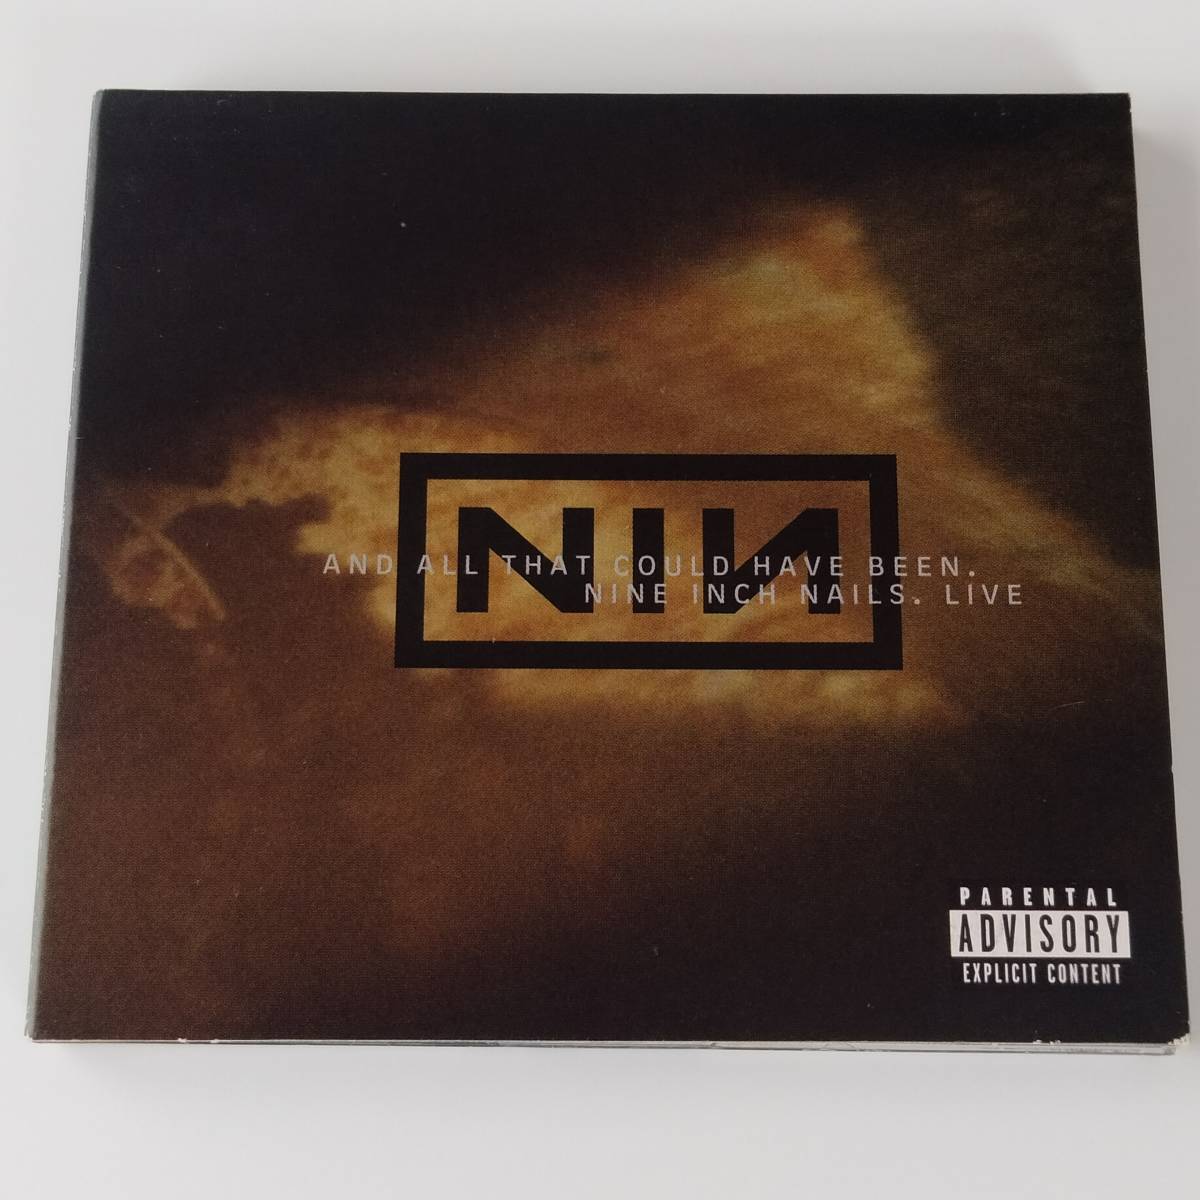 【NIN 輸入盤】NINE INCH NAILS / AND ALL THAT COULD HAVE BEEN (LIVE) (0694931852) ナイン・インチ・ネイルズ_画像1